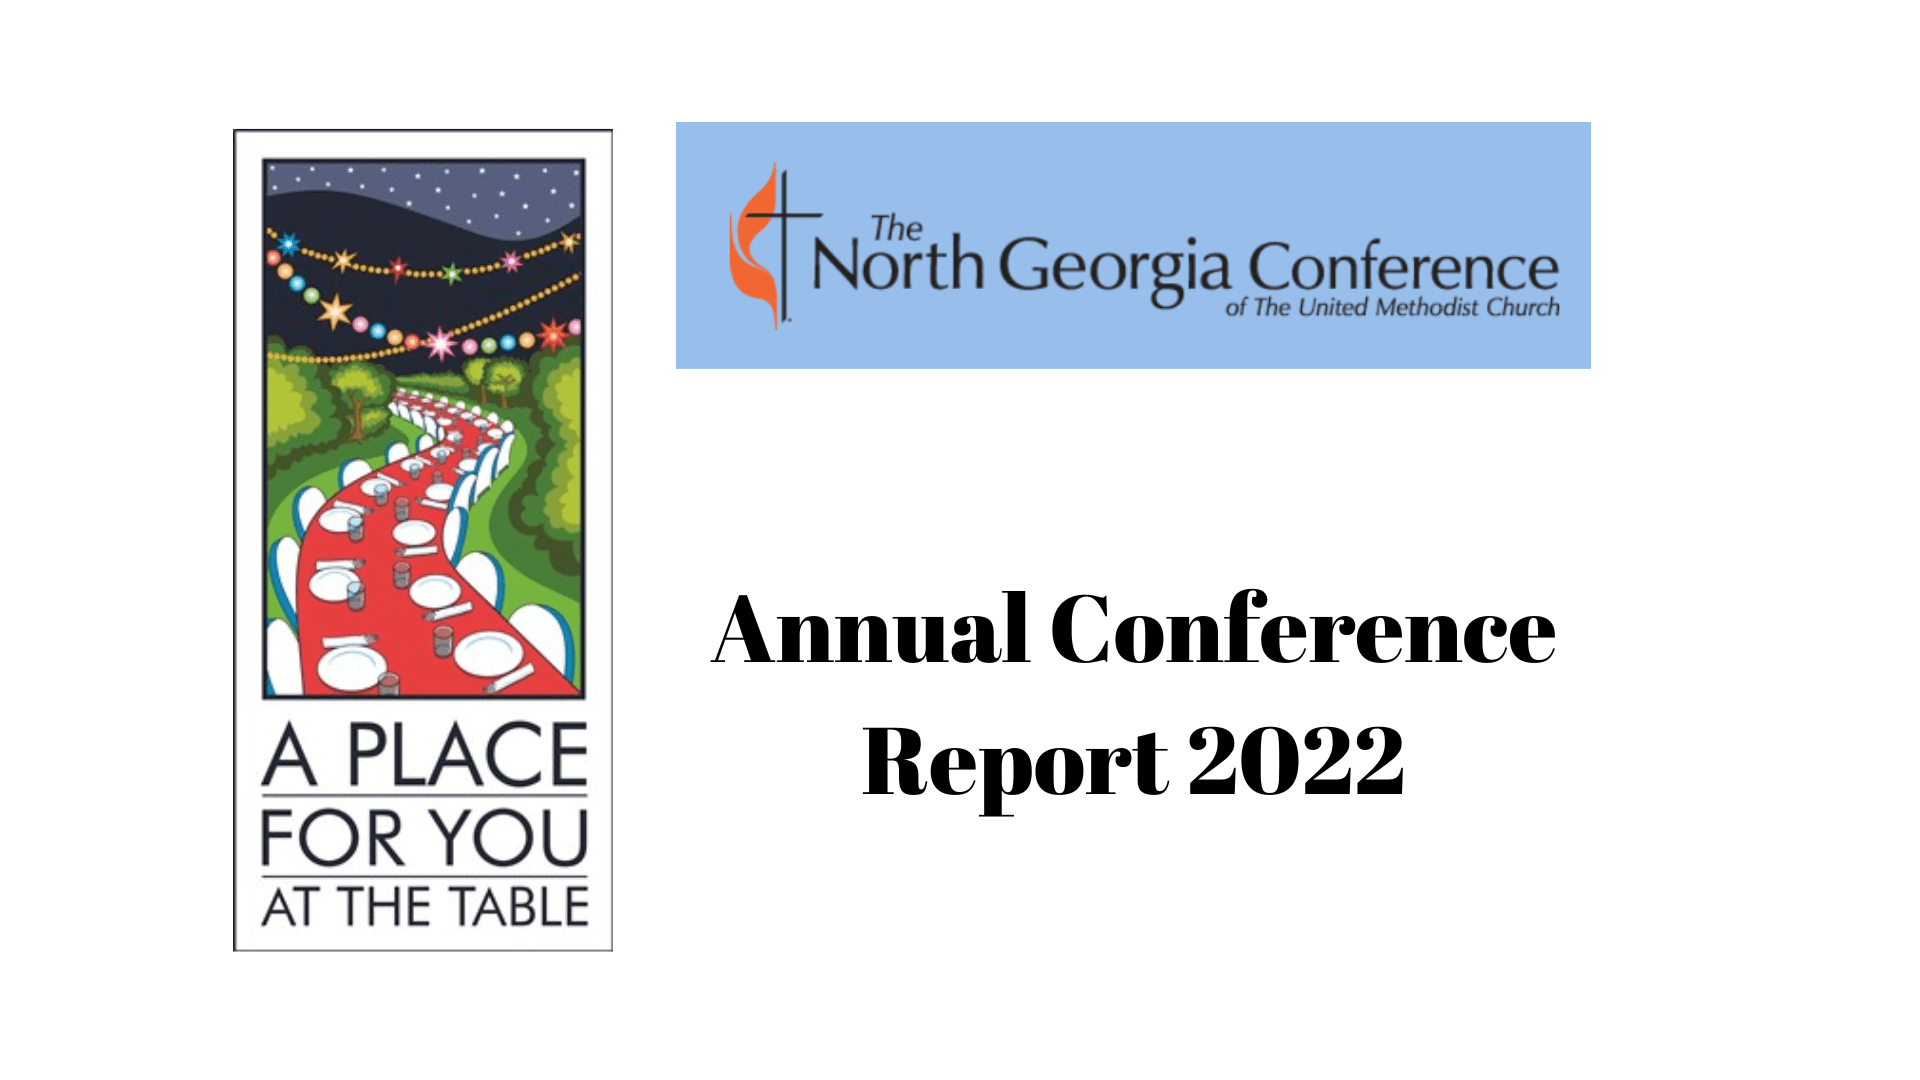 2022 Annual Conference Report a place at the table